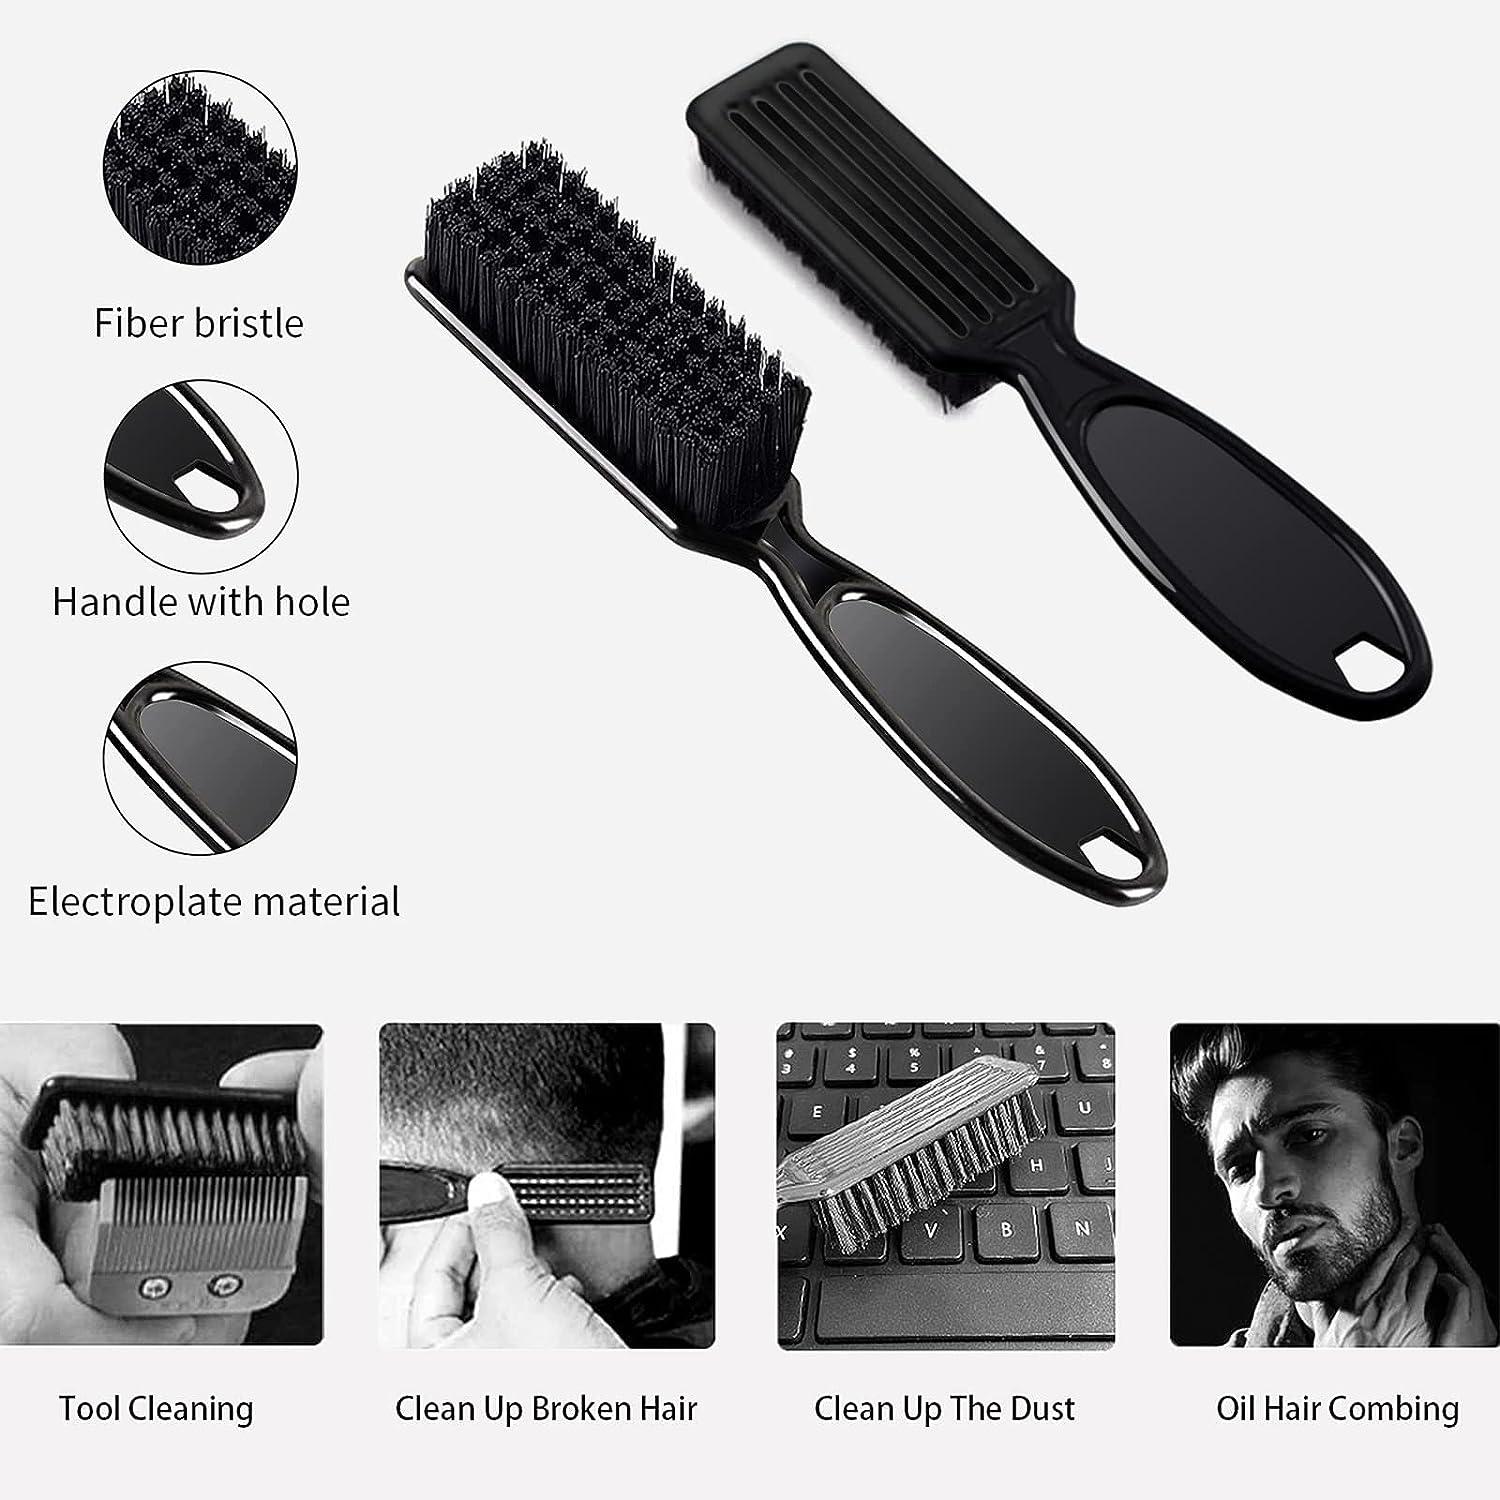 2 Pieces Barber Brush Set with Barber Blade Cleaning Brush Neck Duster Brush  Clipper Cleaning Brush Styling Brush Tool for Barbershop and Home Use -  Black